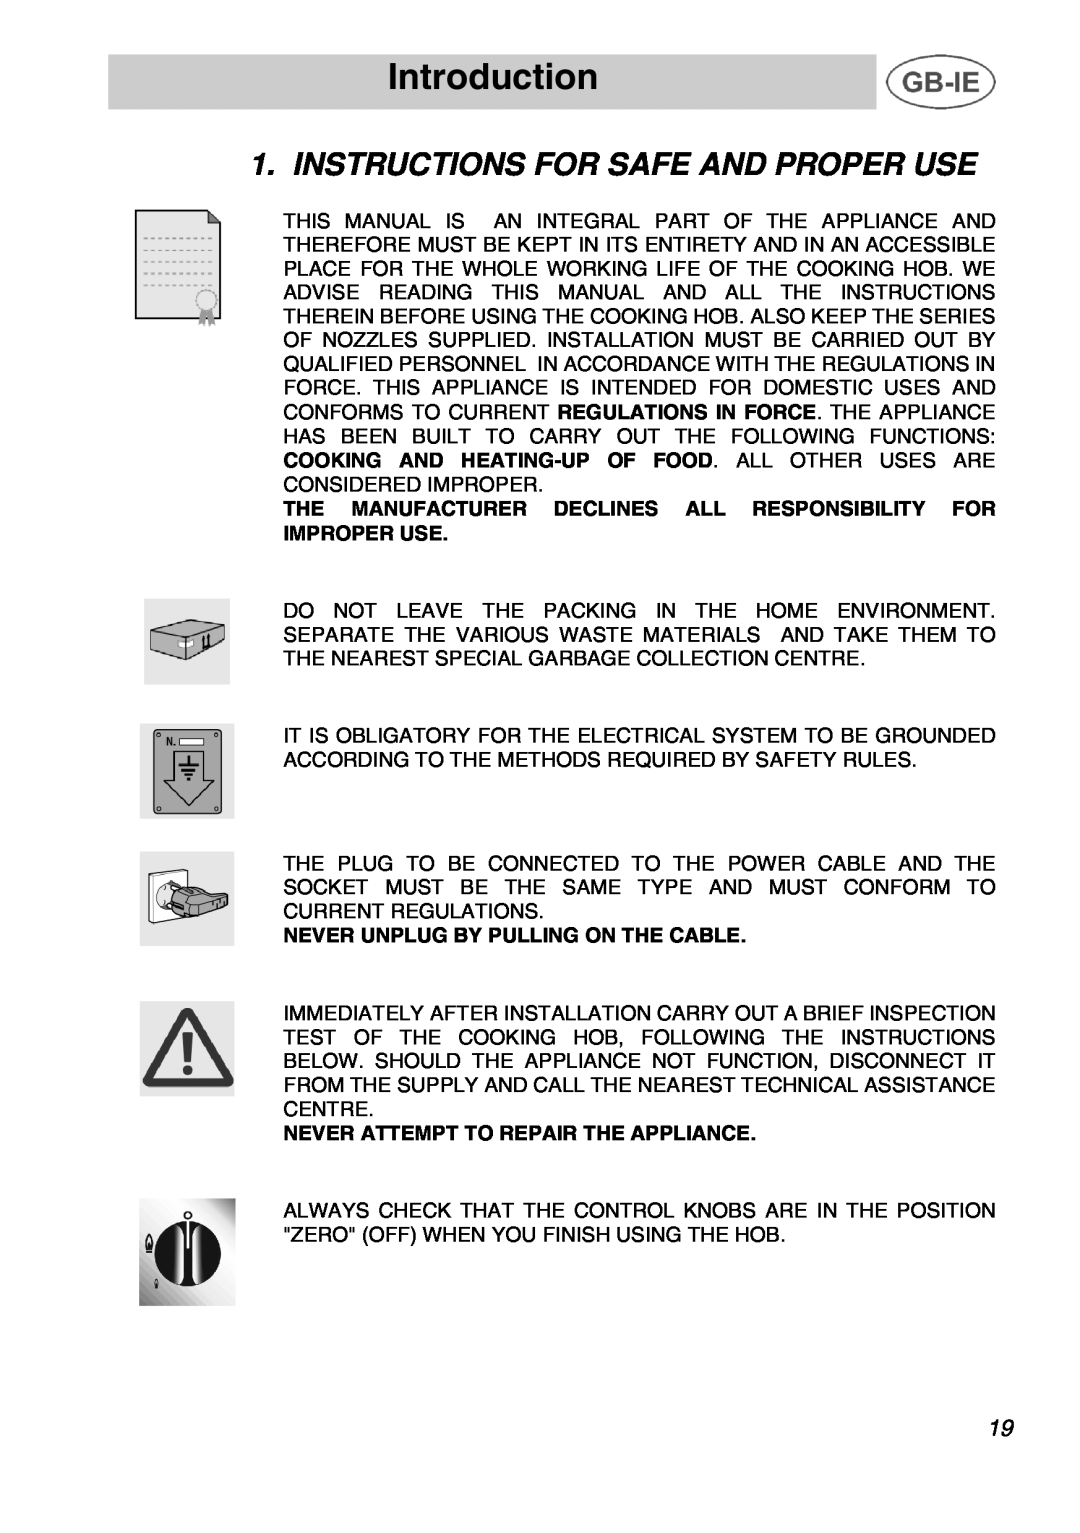 Bosch Appliances NCT 685 N manual Introduction, Instructions For Safe And Proper Use, Never Unplug By Pulling On The Cable 